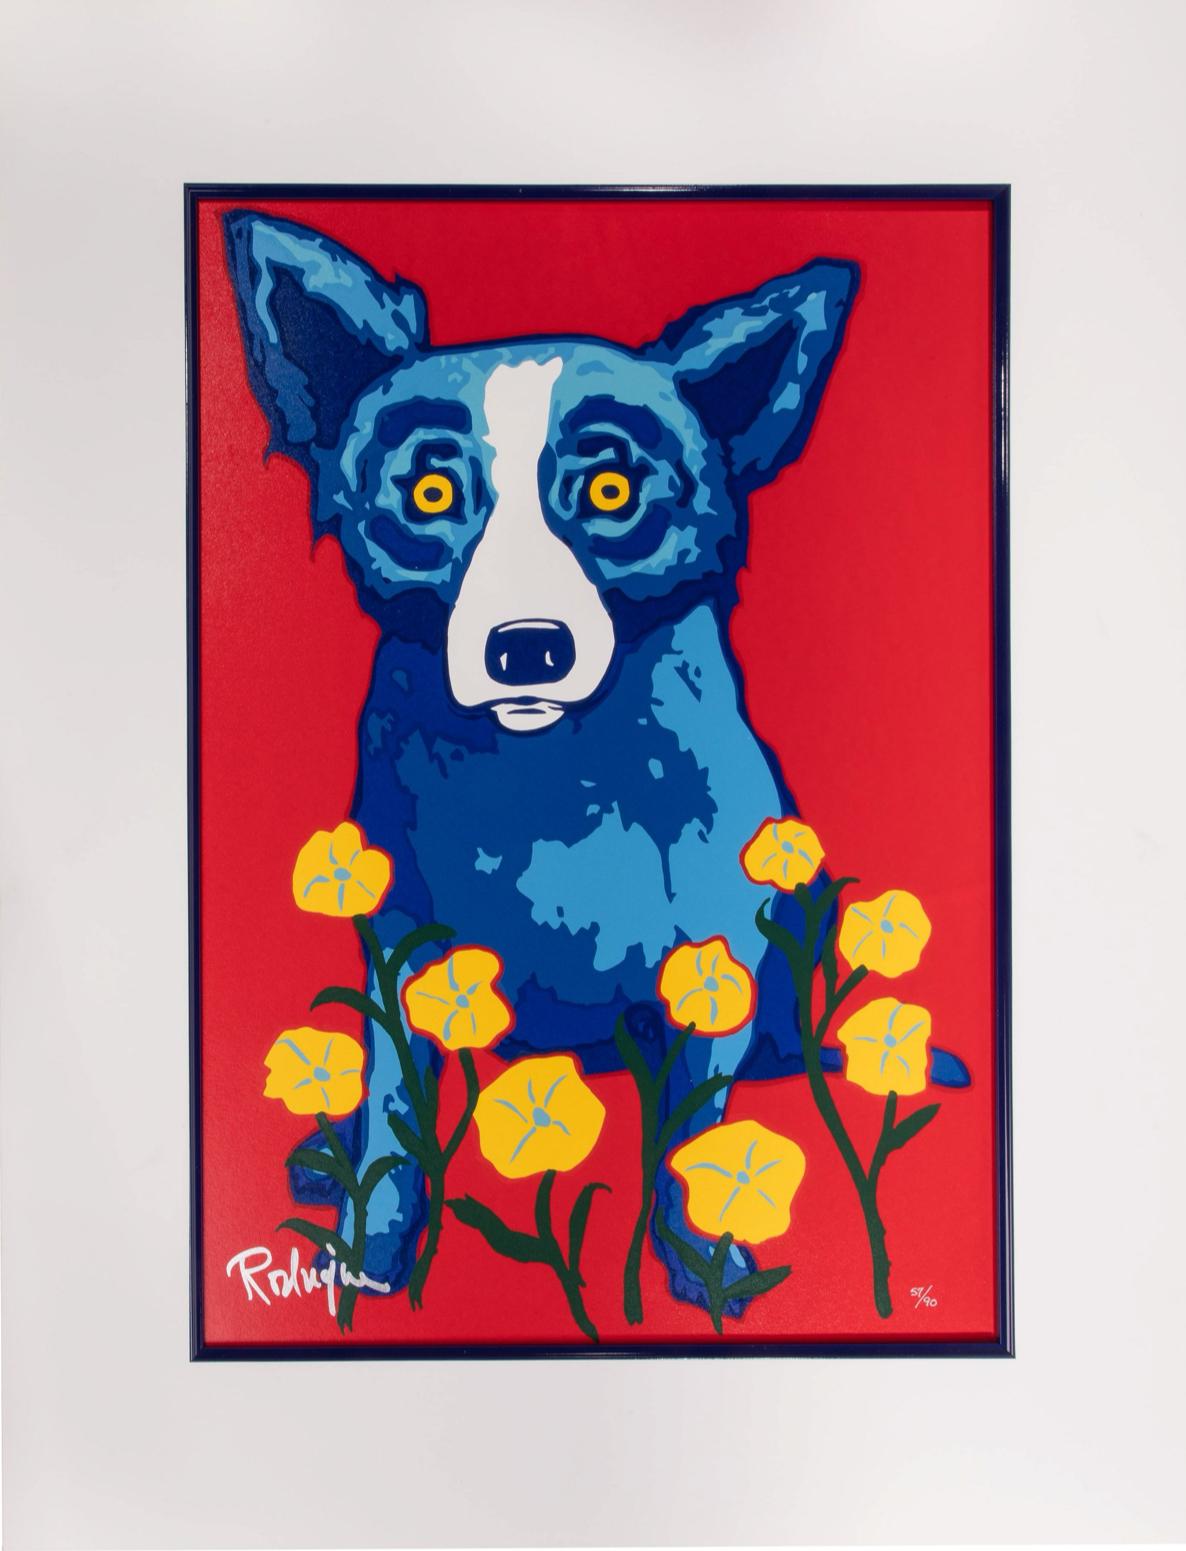 See How My Garden Grows, (1996) by George Rodrigue

An original hand pulled silkscreen by George Rodrigue, signed in paint pen 